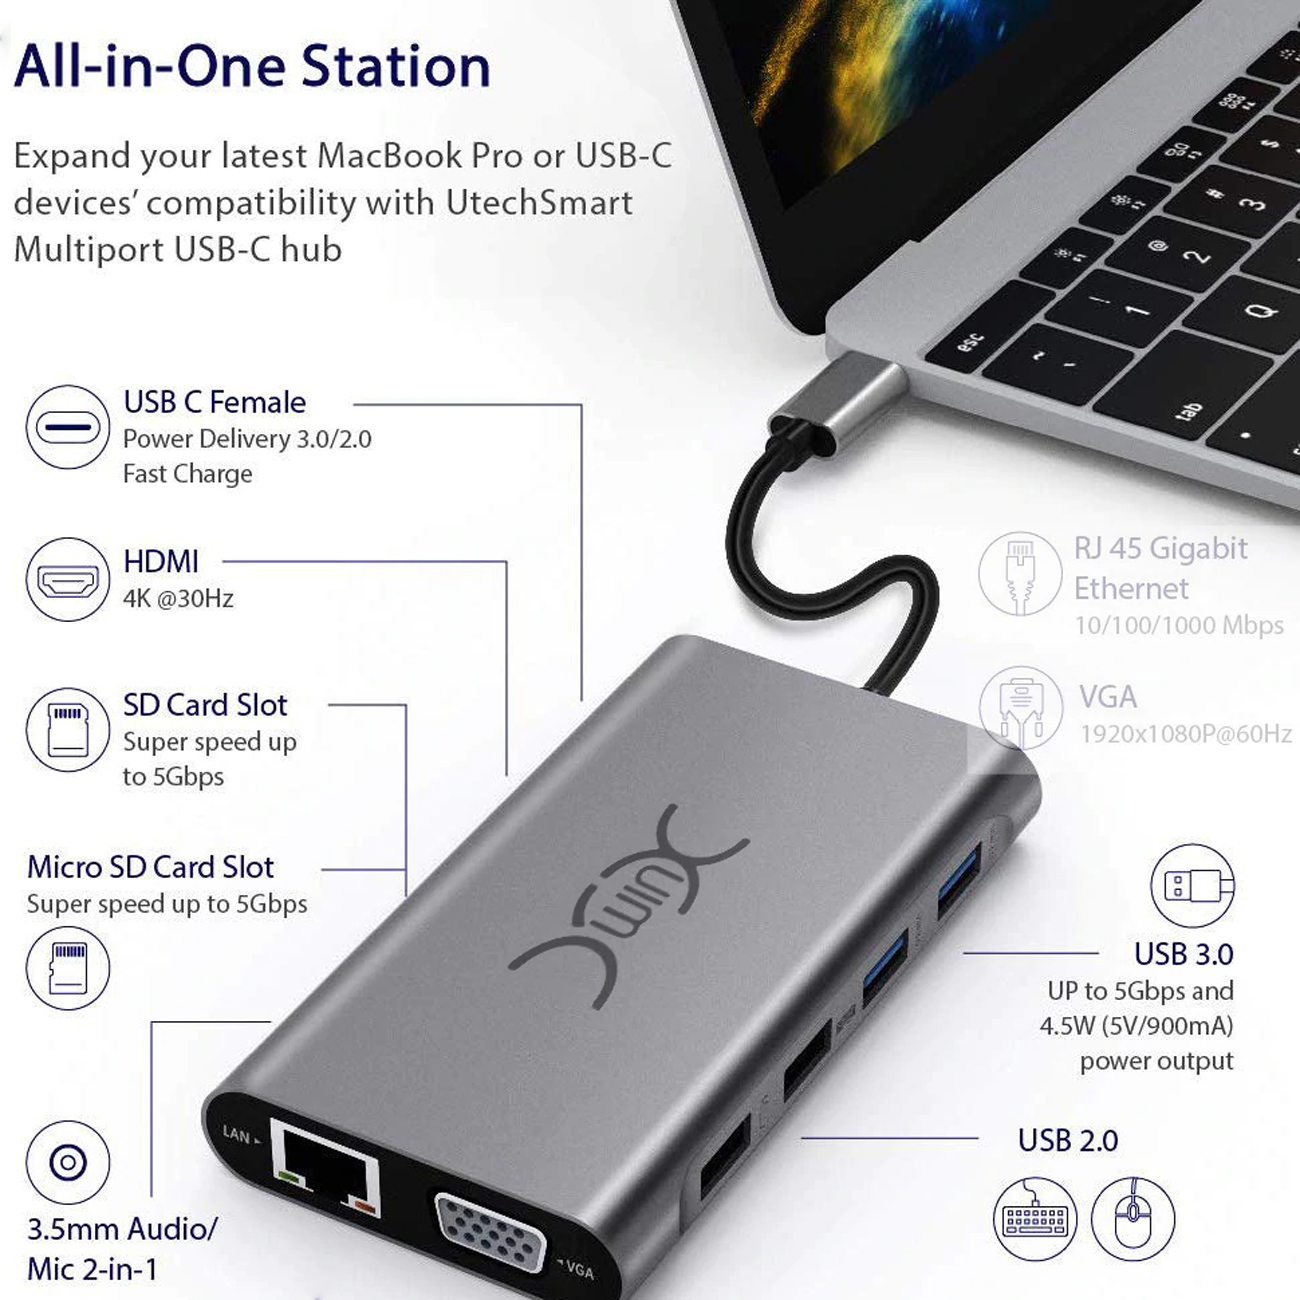 Audio USB-C USB C Docking Station USB C Hub USB3.0/2.0 Gigabit Ethernet VGA DP 15 in 1 Triple Display USB C Adapter with 4K HDMI SD/TF Card Slots Compatible for Apple Mac and Type C Devices 